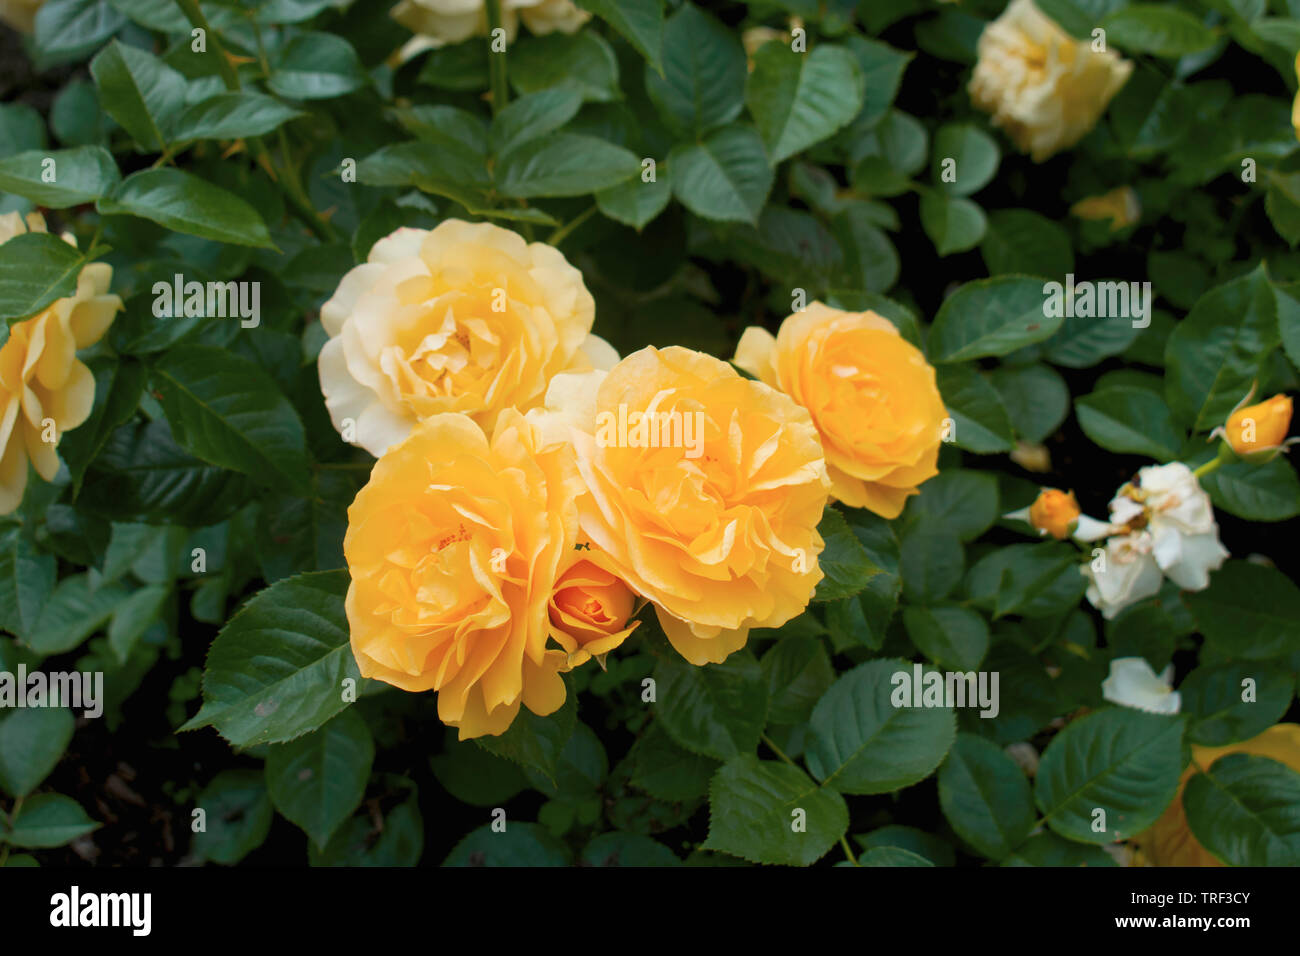 Several large yellow roses surrounded by dark green leaves Stock Photo